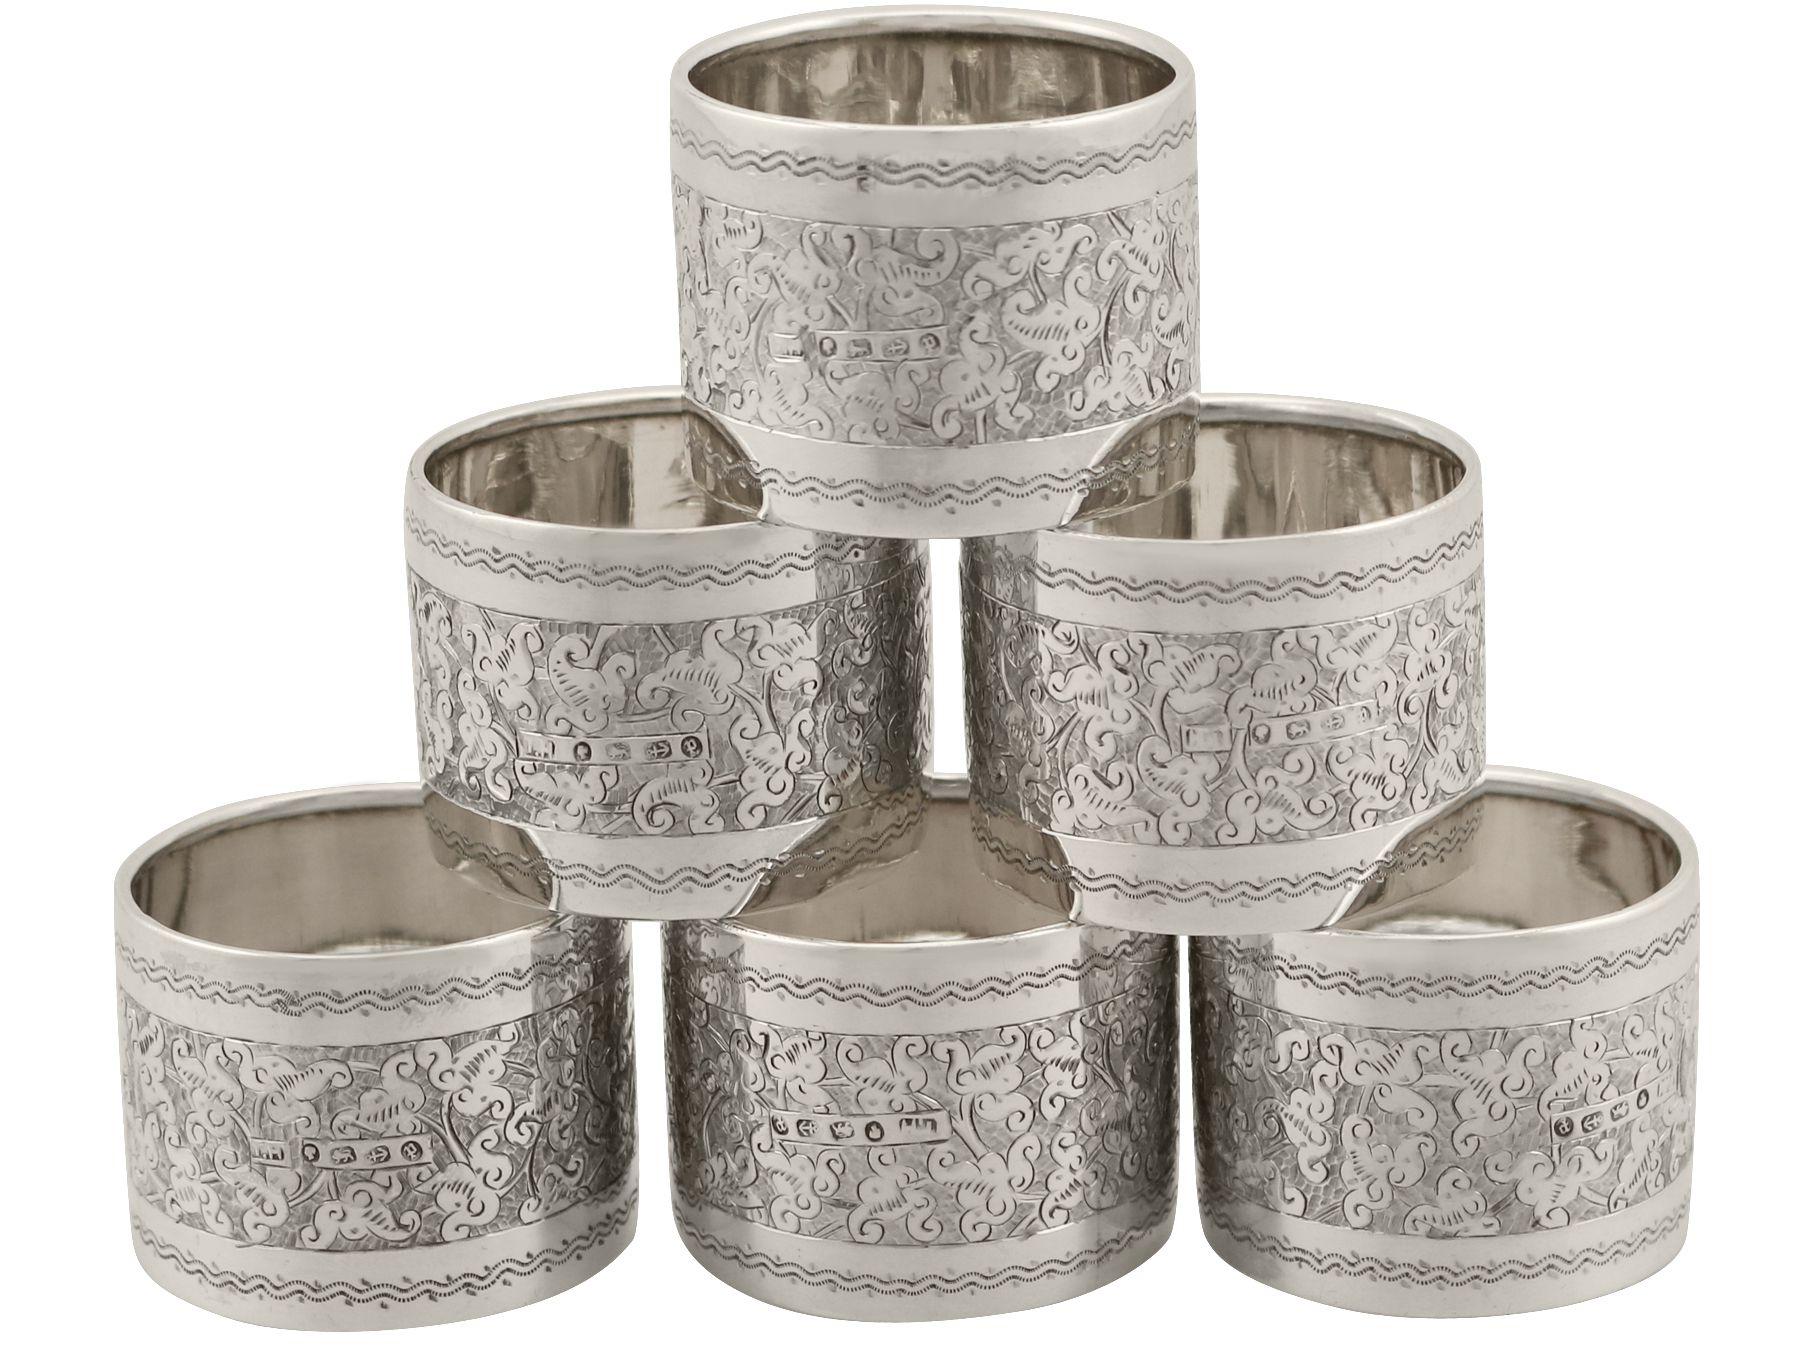 British 19th Century Sterling Silver Napkin Rings Set of Six Antique Victorian 1889